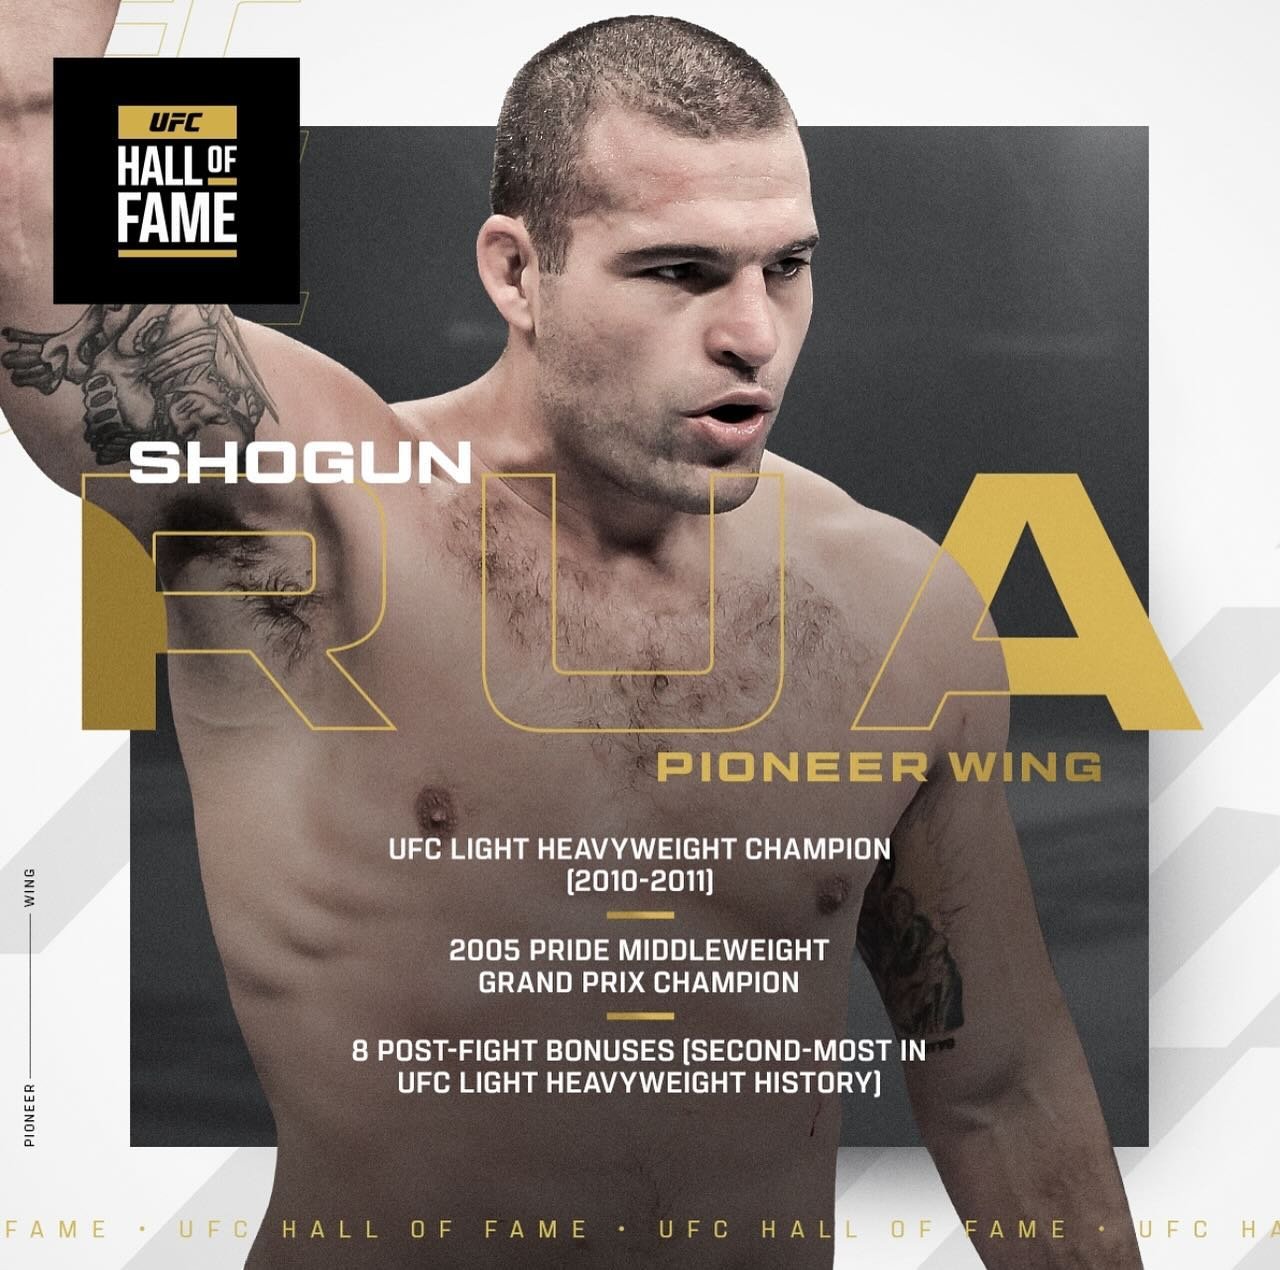 We are proud to have two of our pioneer Kings MMA lengends being inducted into the Class of 2024 Hall of Fame of the UFC this year. Thank you @shogunoficial and @wandfc for being examples to our future Kings generations! #ufchof